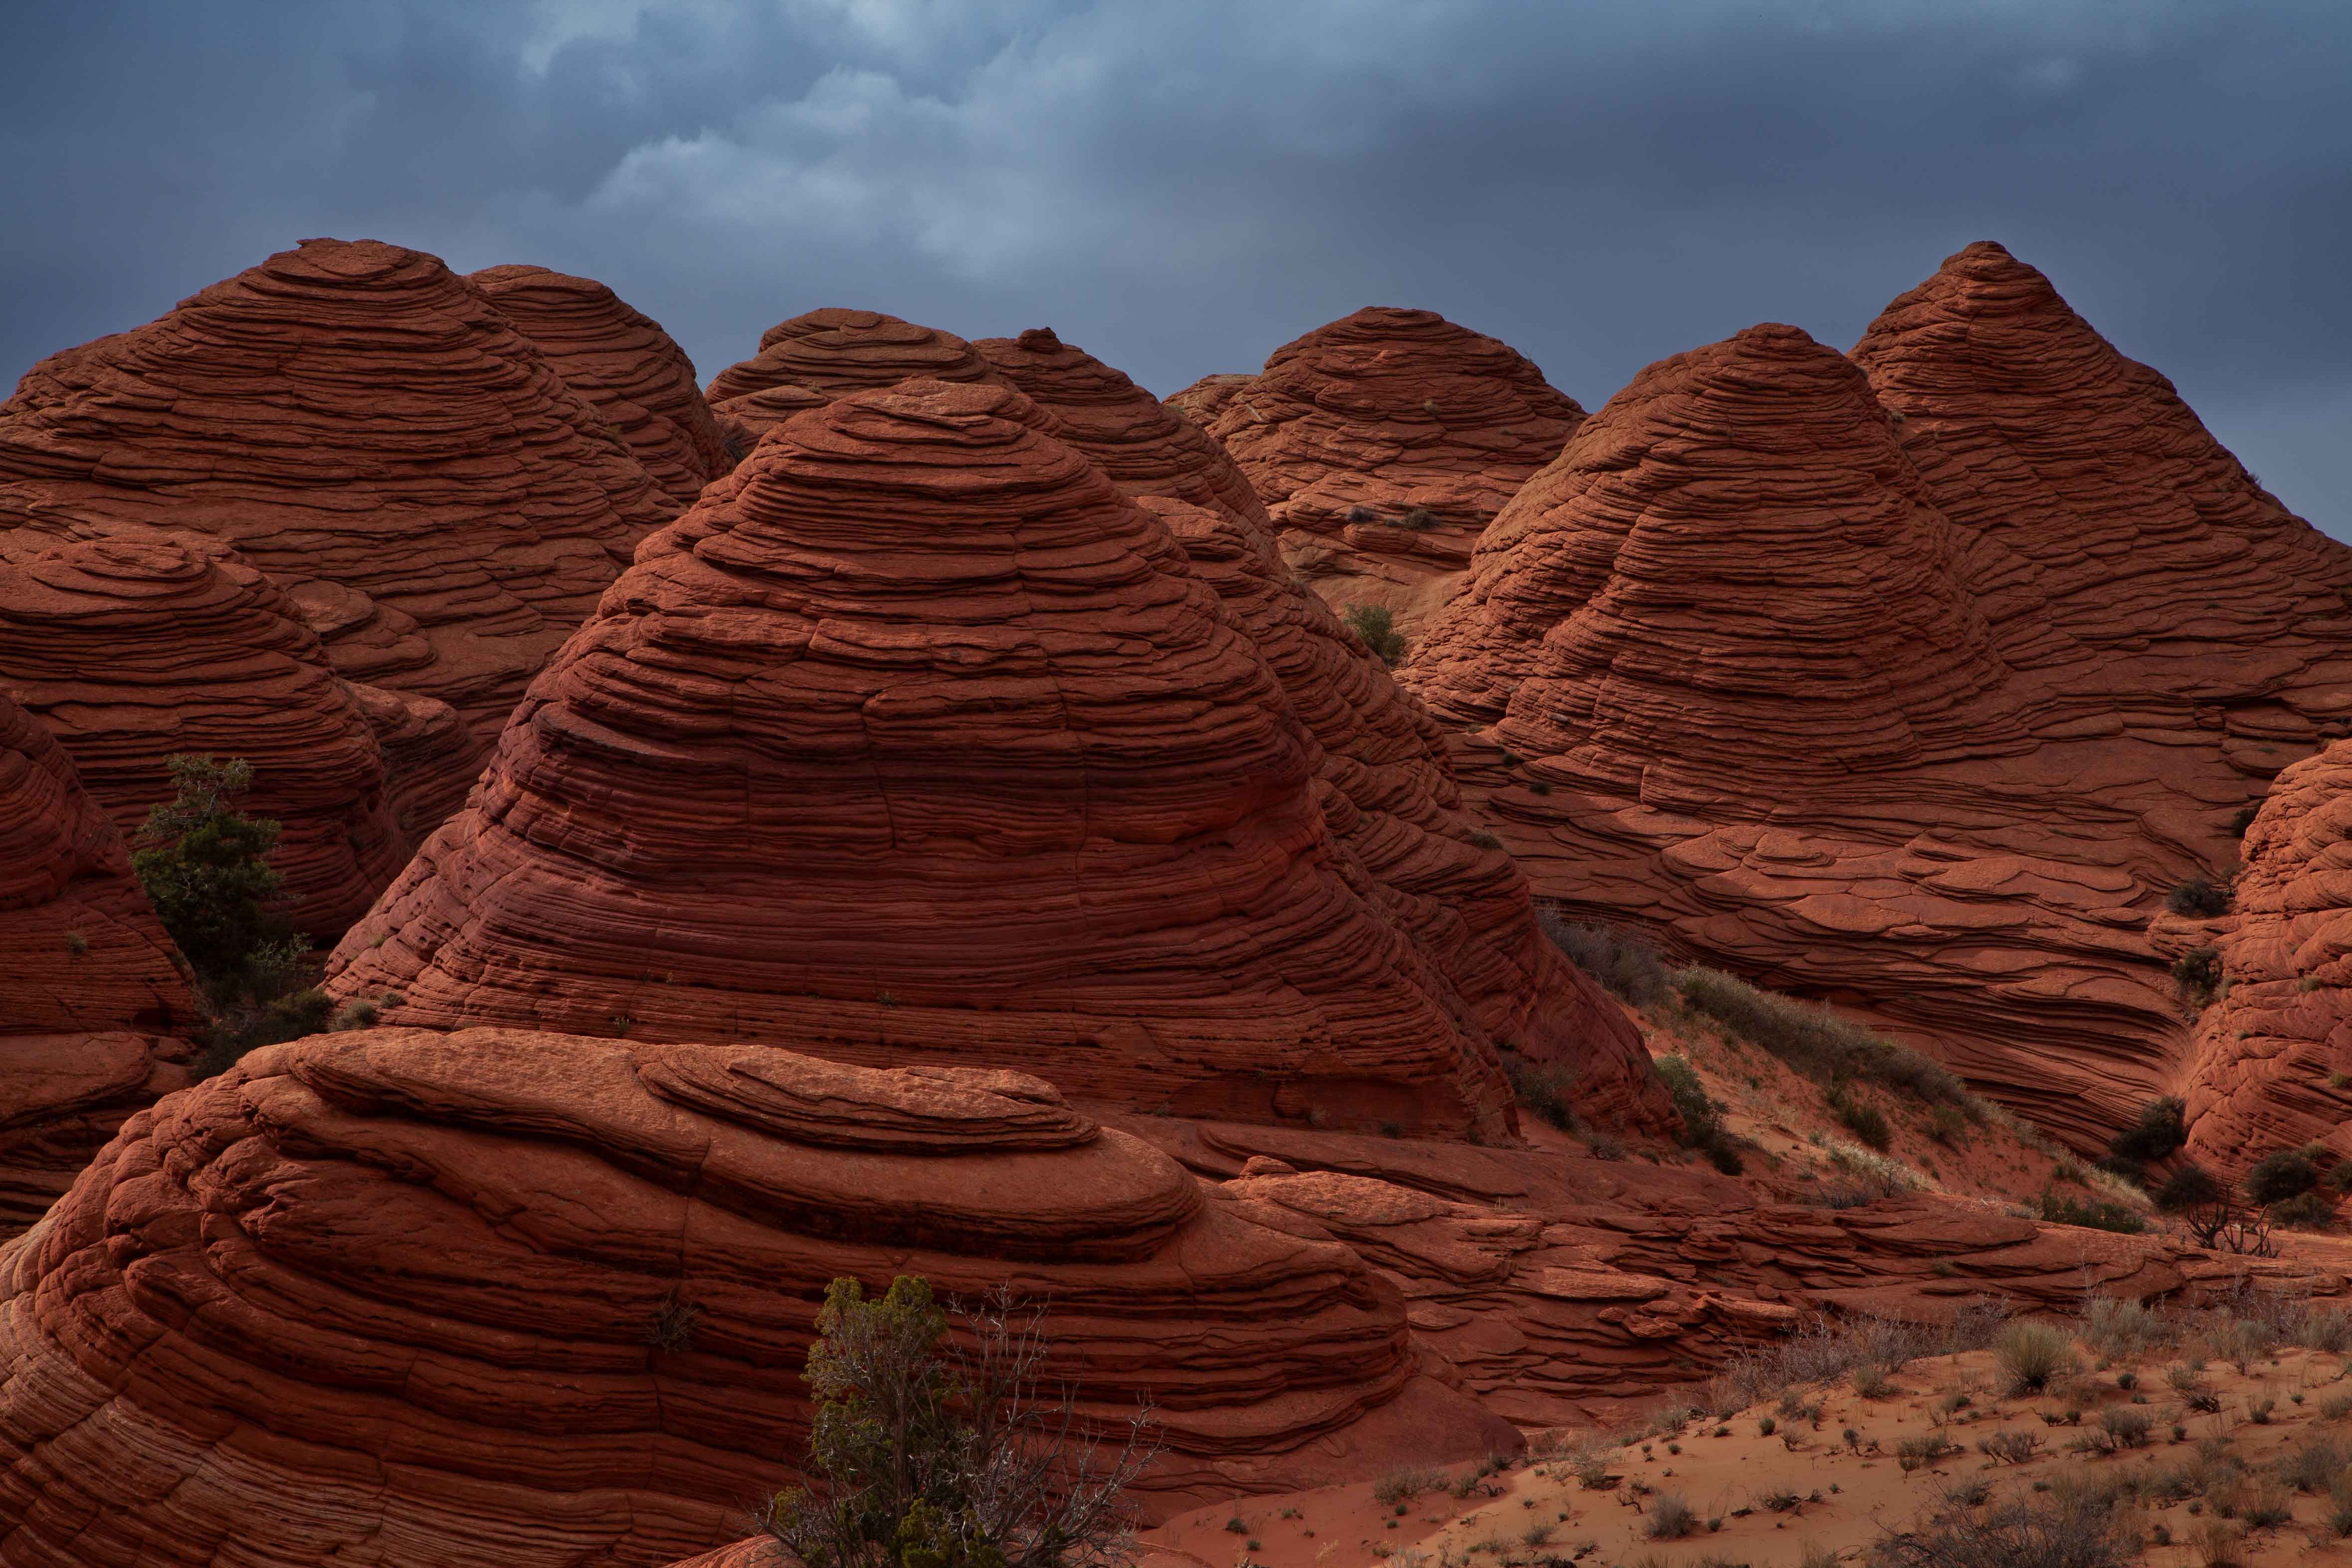 Sandstone rock formations at Coyote Buttes, Arizona